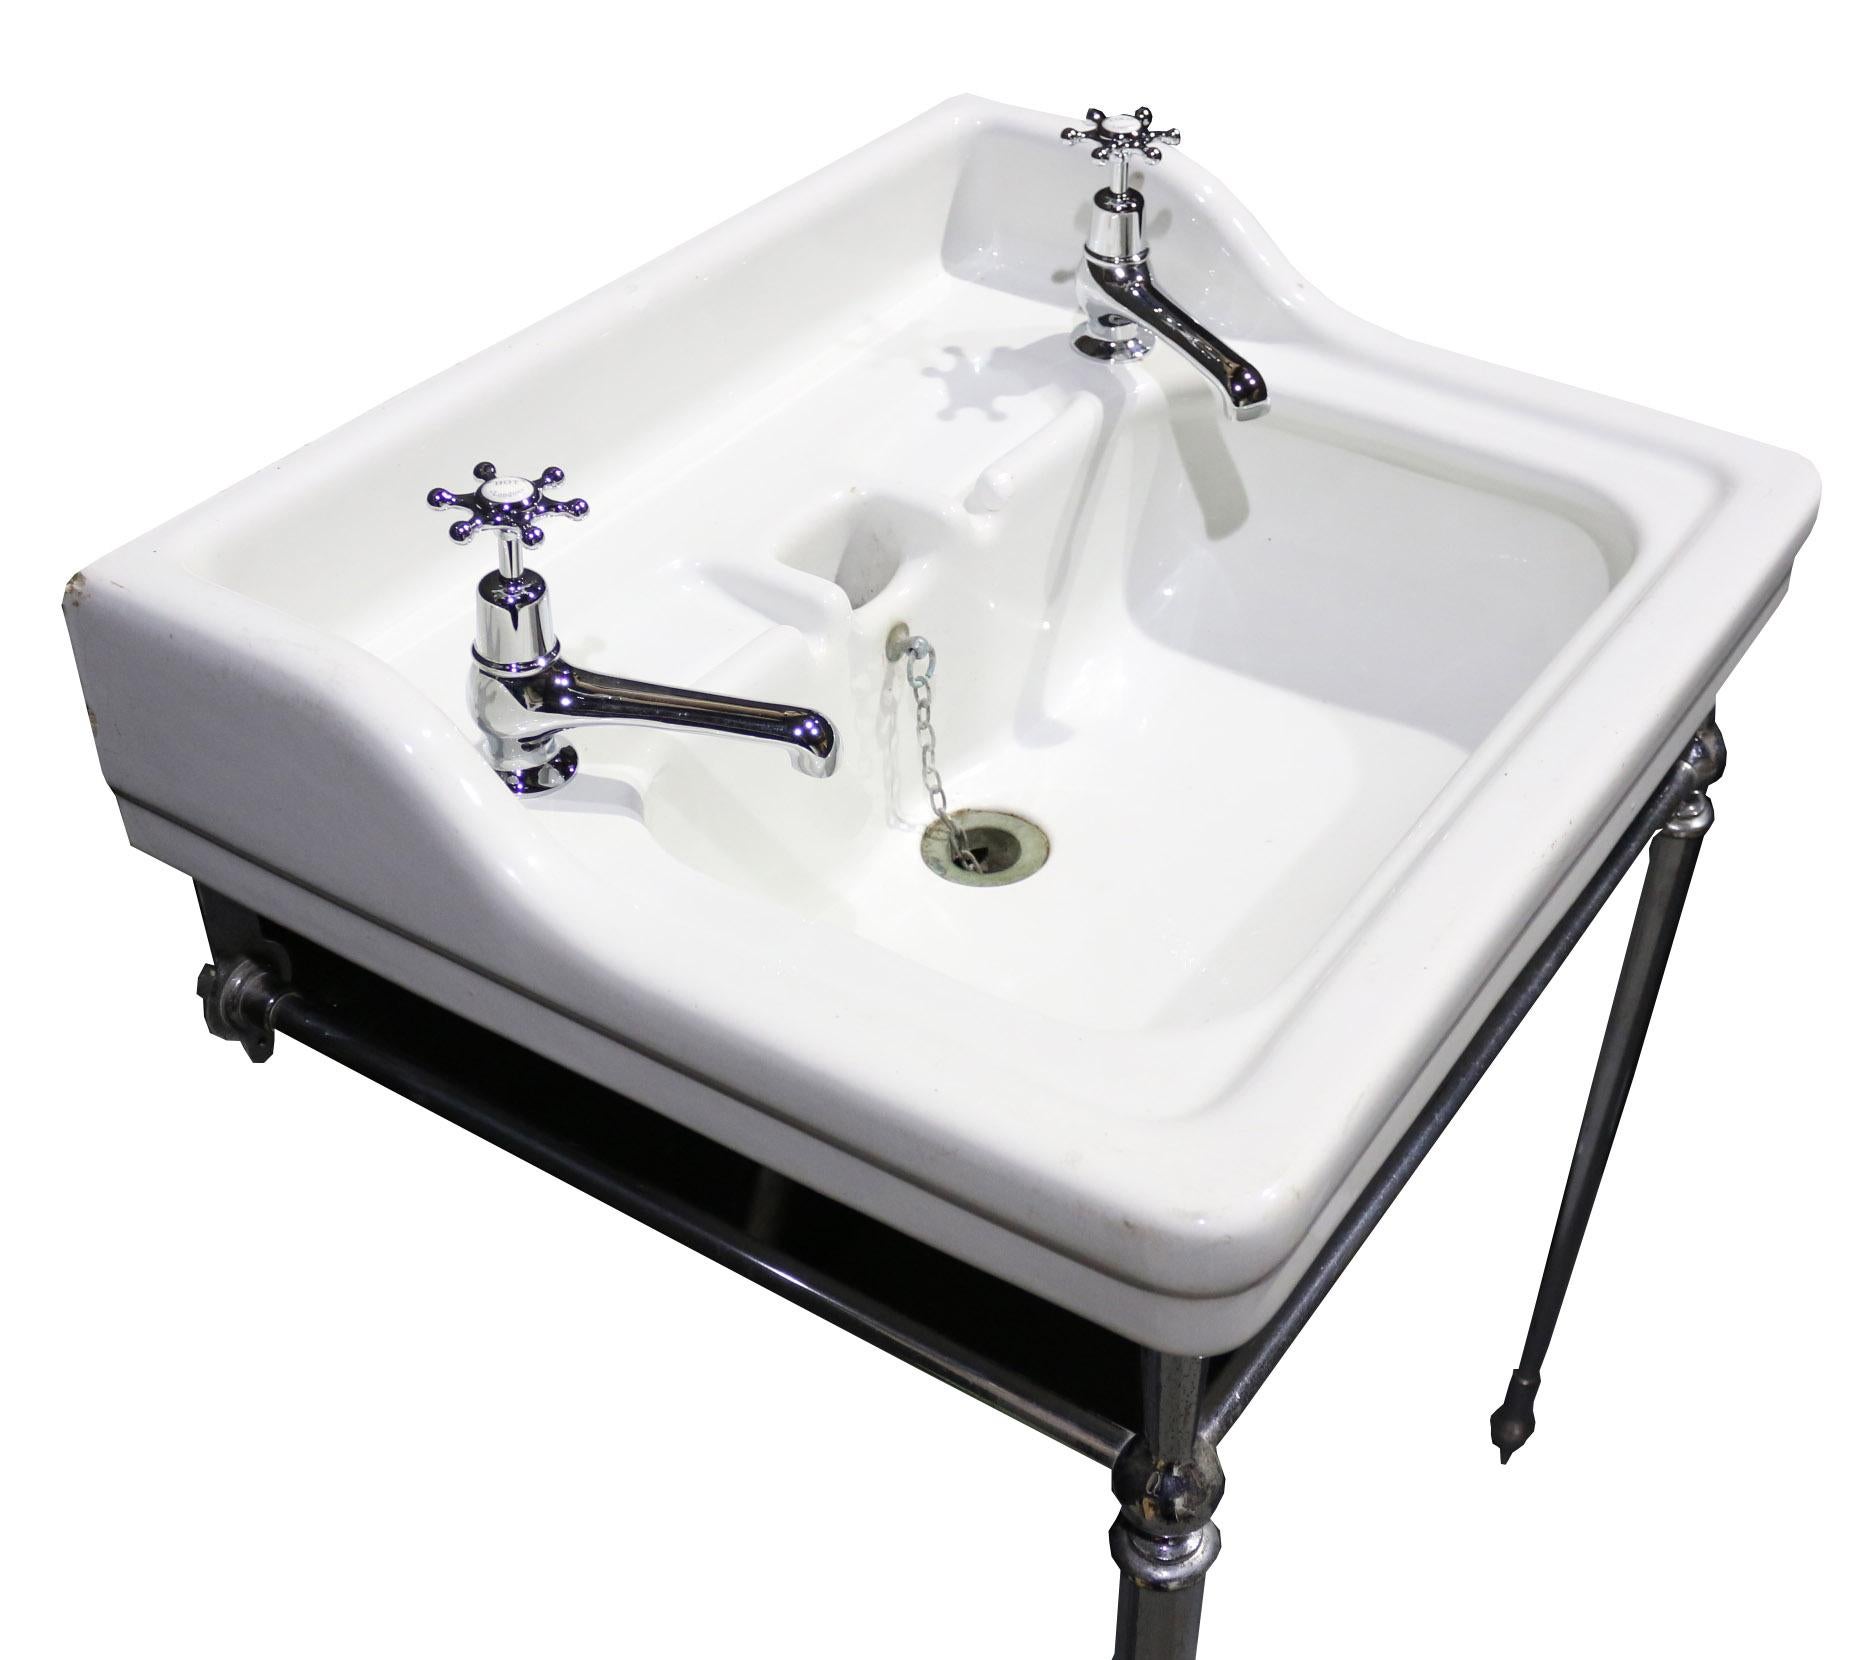 European Antique ‘ Musgraves’ Basin with Stand